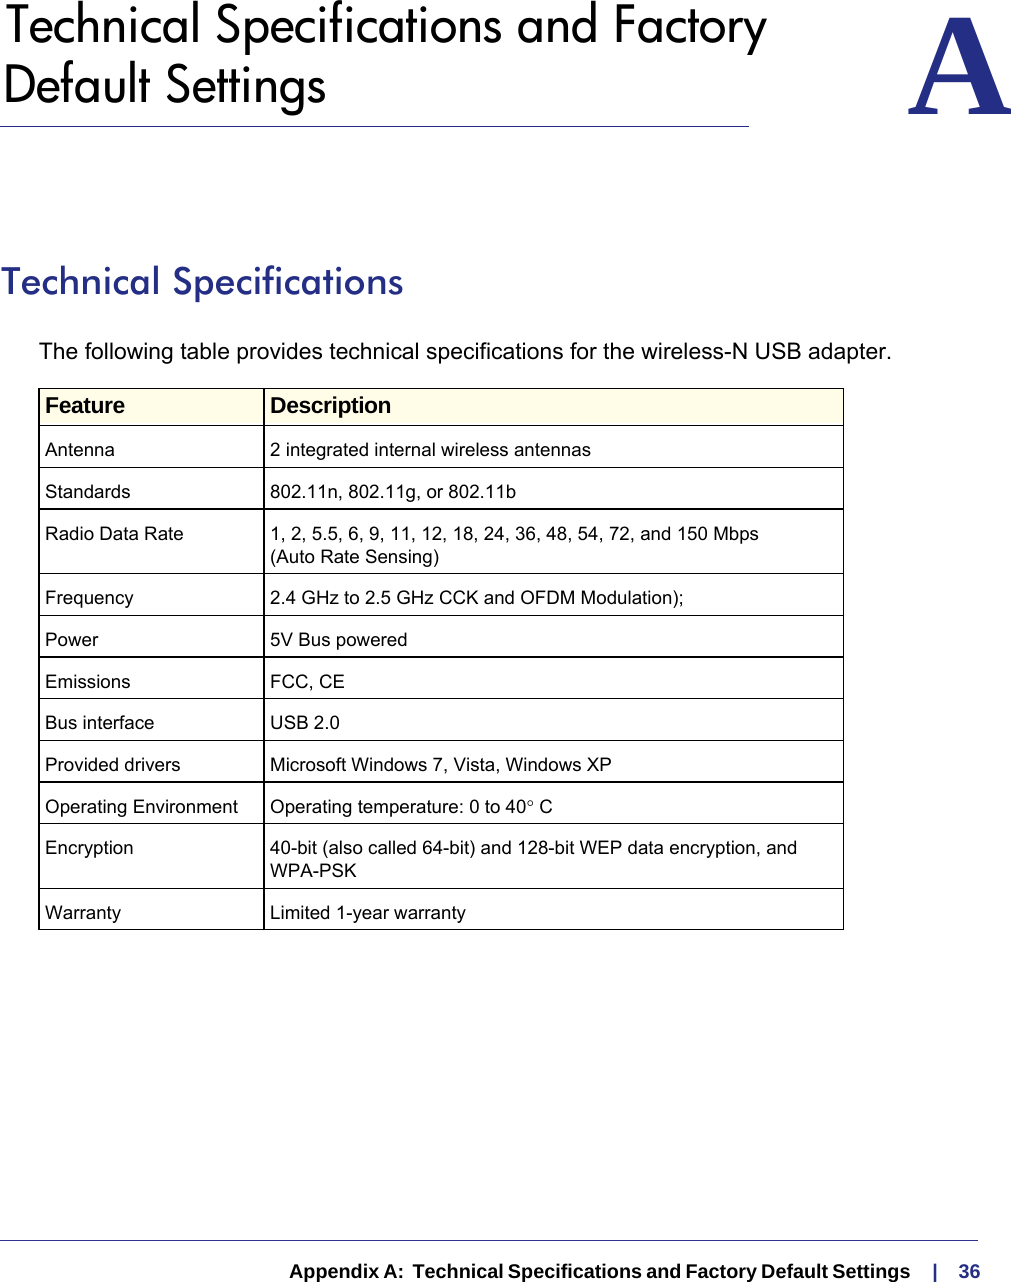   Appendix A:  Technical Specifications and Factory Default Settings     |    36A.   Technical Specifications and Factory Default Settings ATechnical SpecificationsThe following table provides technical specifications for the wireless-N USB adapter. Feature DescriptionAntenna 2 integrated internal wireless antennasStandards  802.11n, 802.11g, or 802.11bRadio Data Rate 1, 2, 5.5, 6, 9, 11, 12, 18, 24, 36, 48, 54, 72, and 150 Mbps  (Auto Rate Sensing)Frequency 2.4 GHz to 2.5 GHz CCK and OFDM Modulation); Power  5V Bus poweredEmissions FCC, CEBus interface USB 2.0Provided drivers Microsoft Windows 7, Vista, Windows XPOperating Environment  Operating temperature: 0 to 40 CEncryption 40-bit (also called 64-bit) and 128-bit WEP data encryption, and WPA-PSKWarranty Limited 1-year warranty